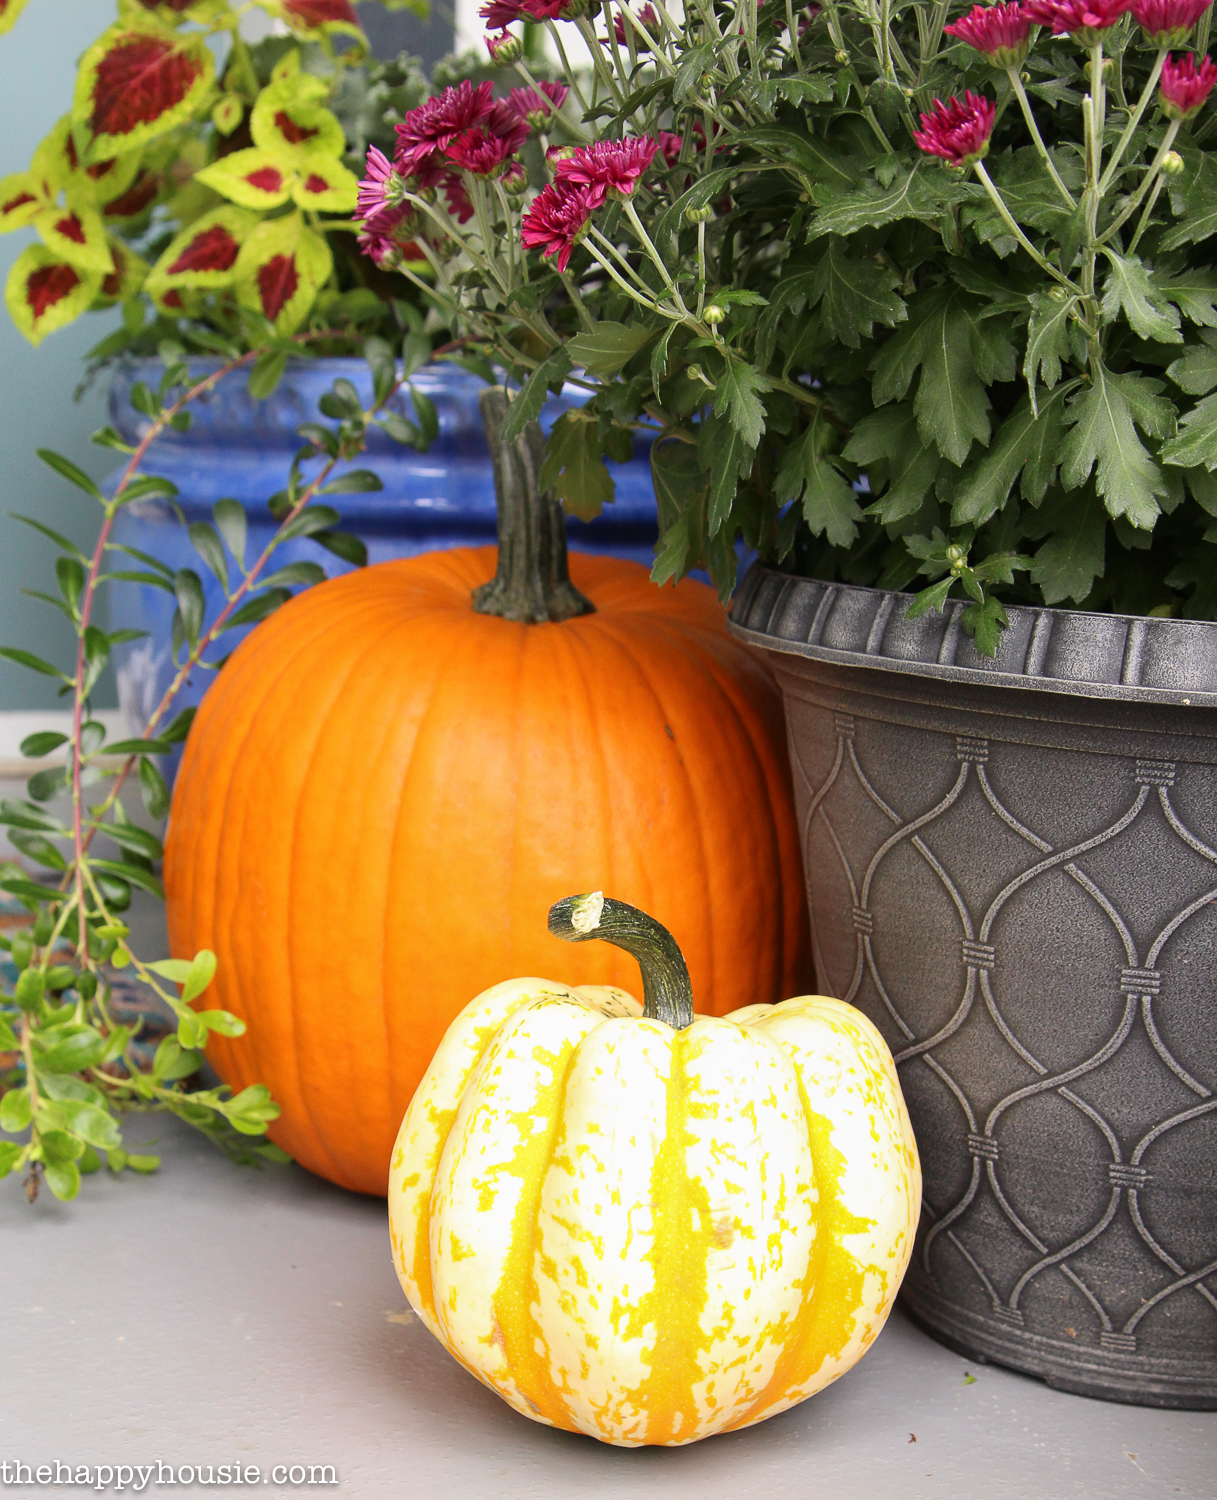 Two pumpkins are beside the potted purple flowers.